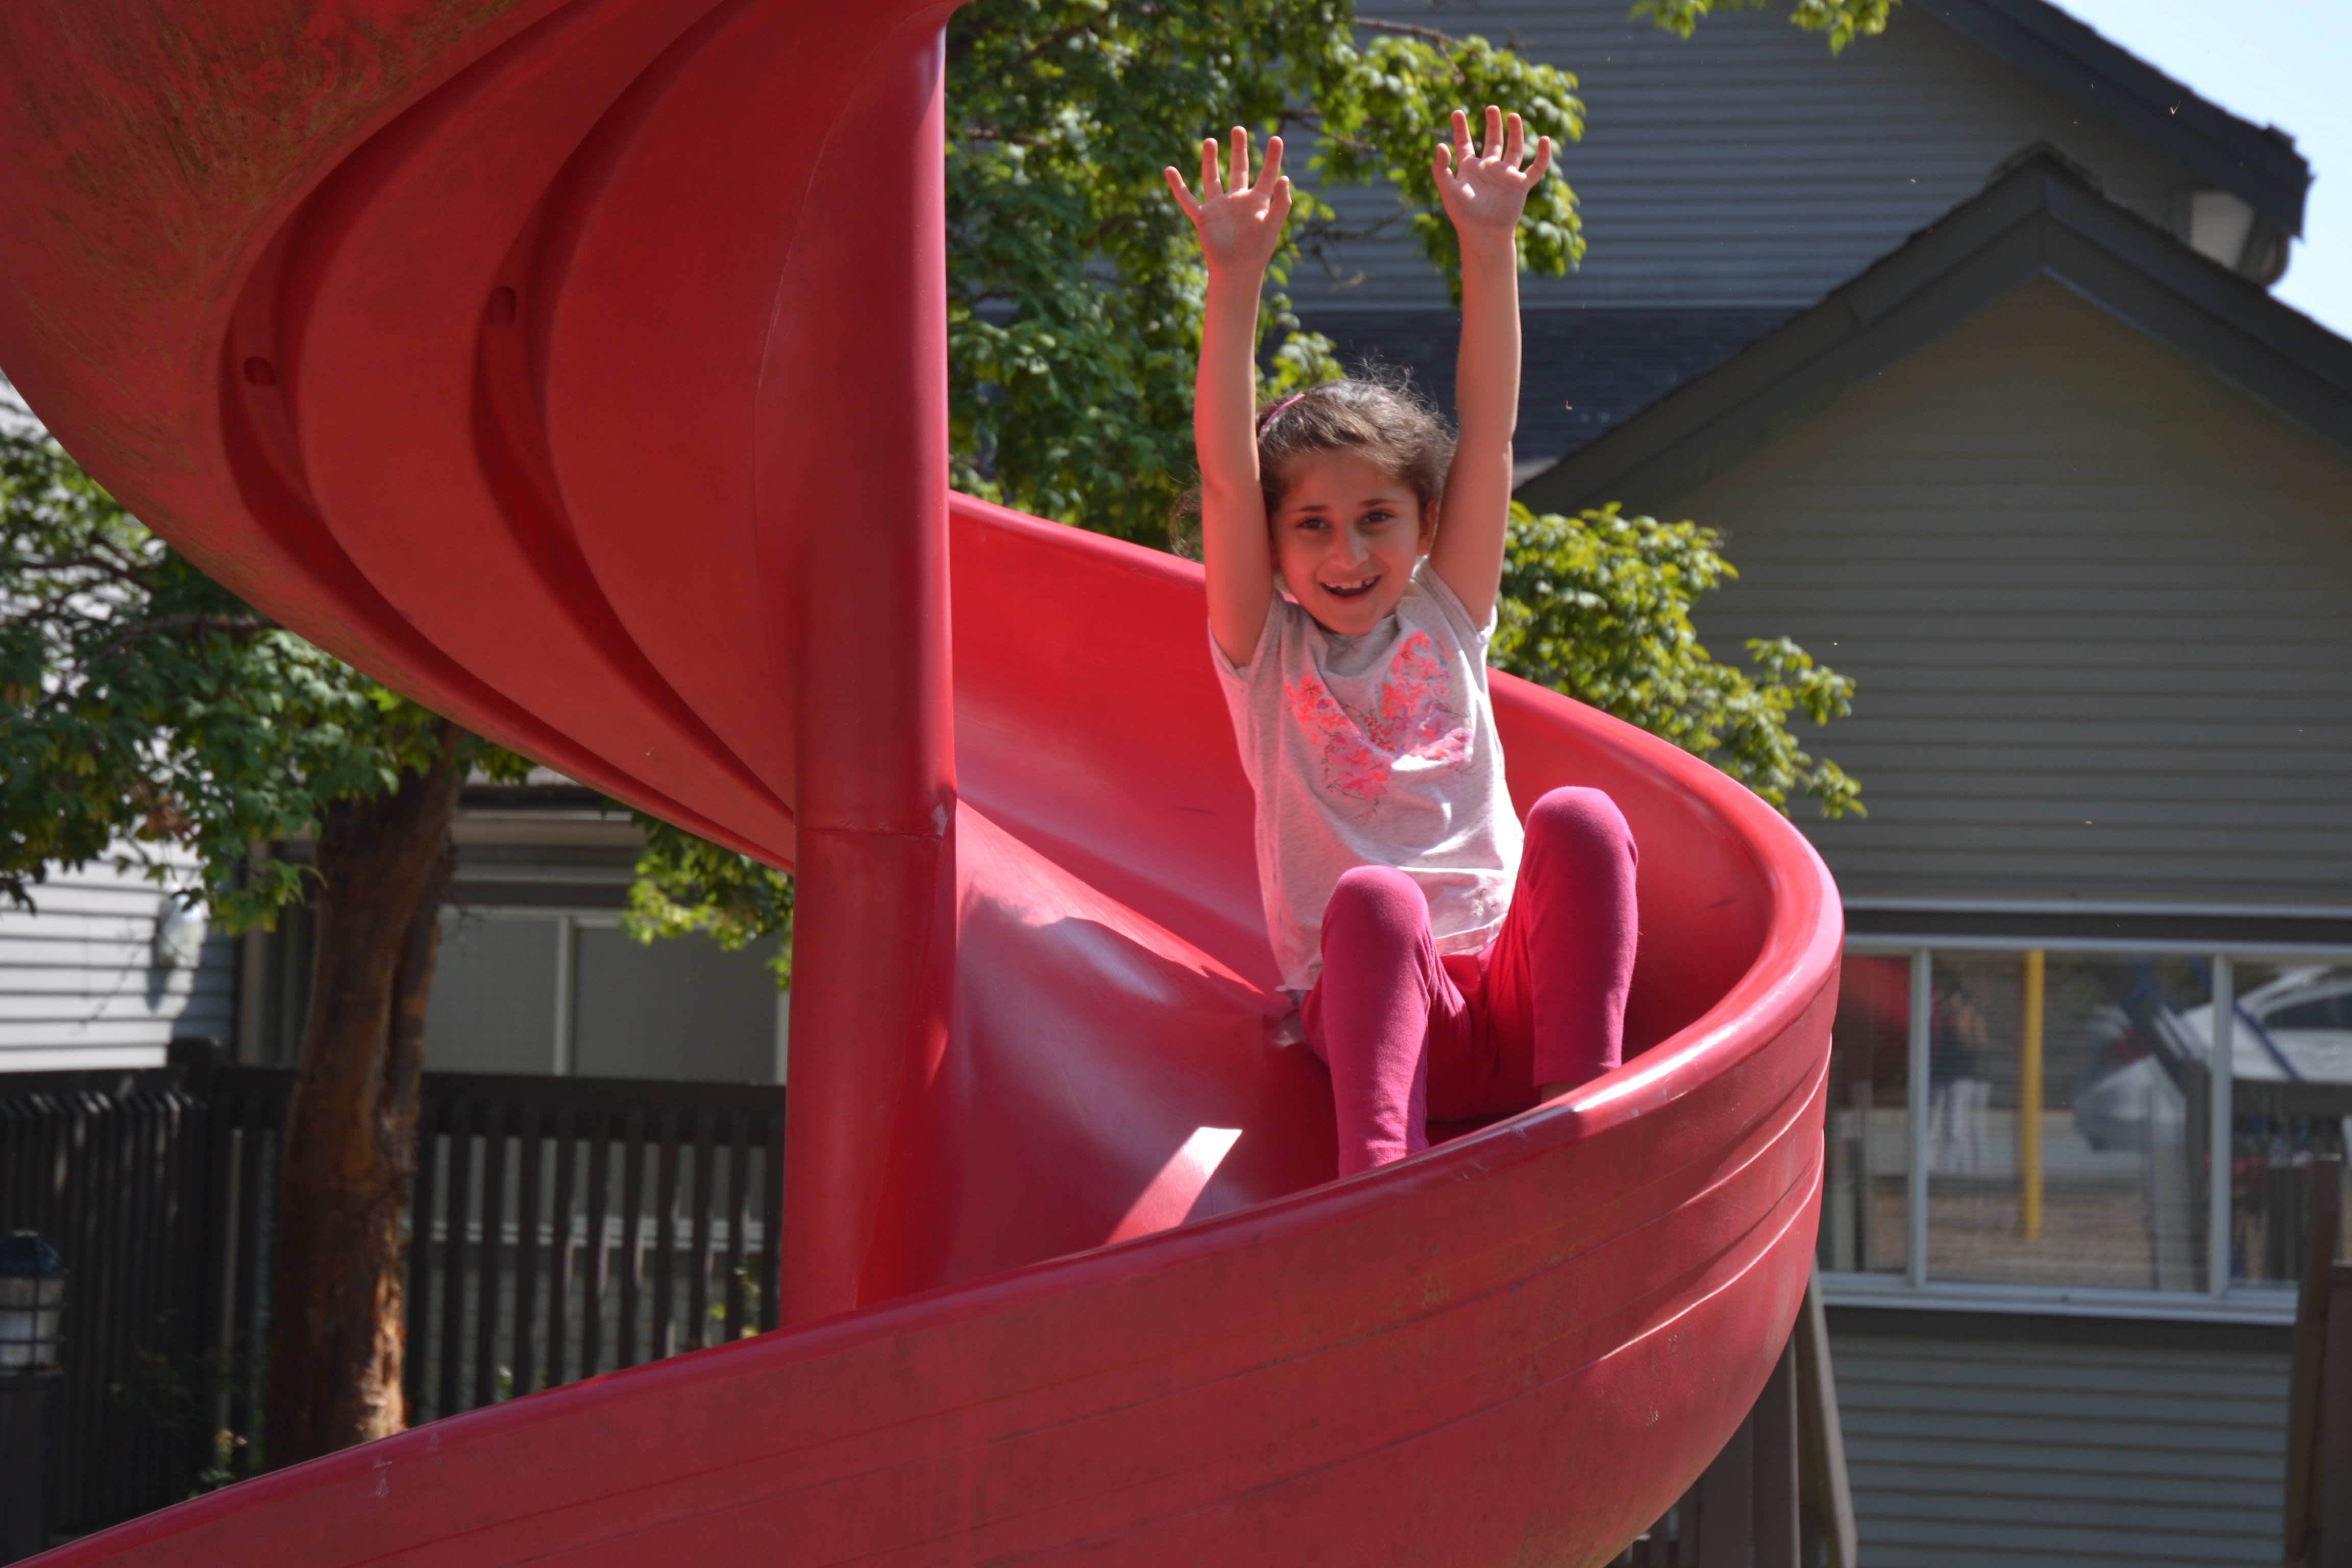 Young girl on a playground slide - Resident of Red Door Housing